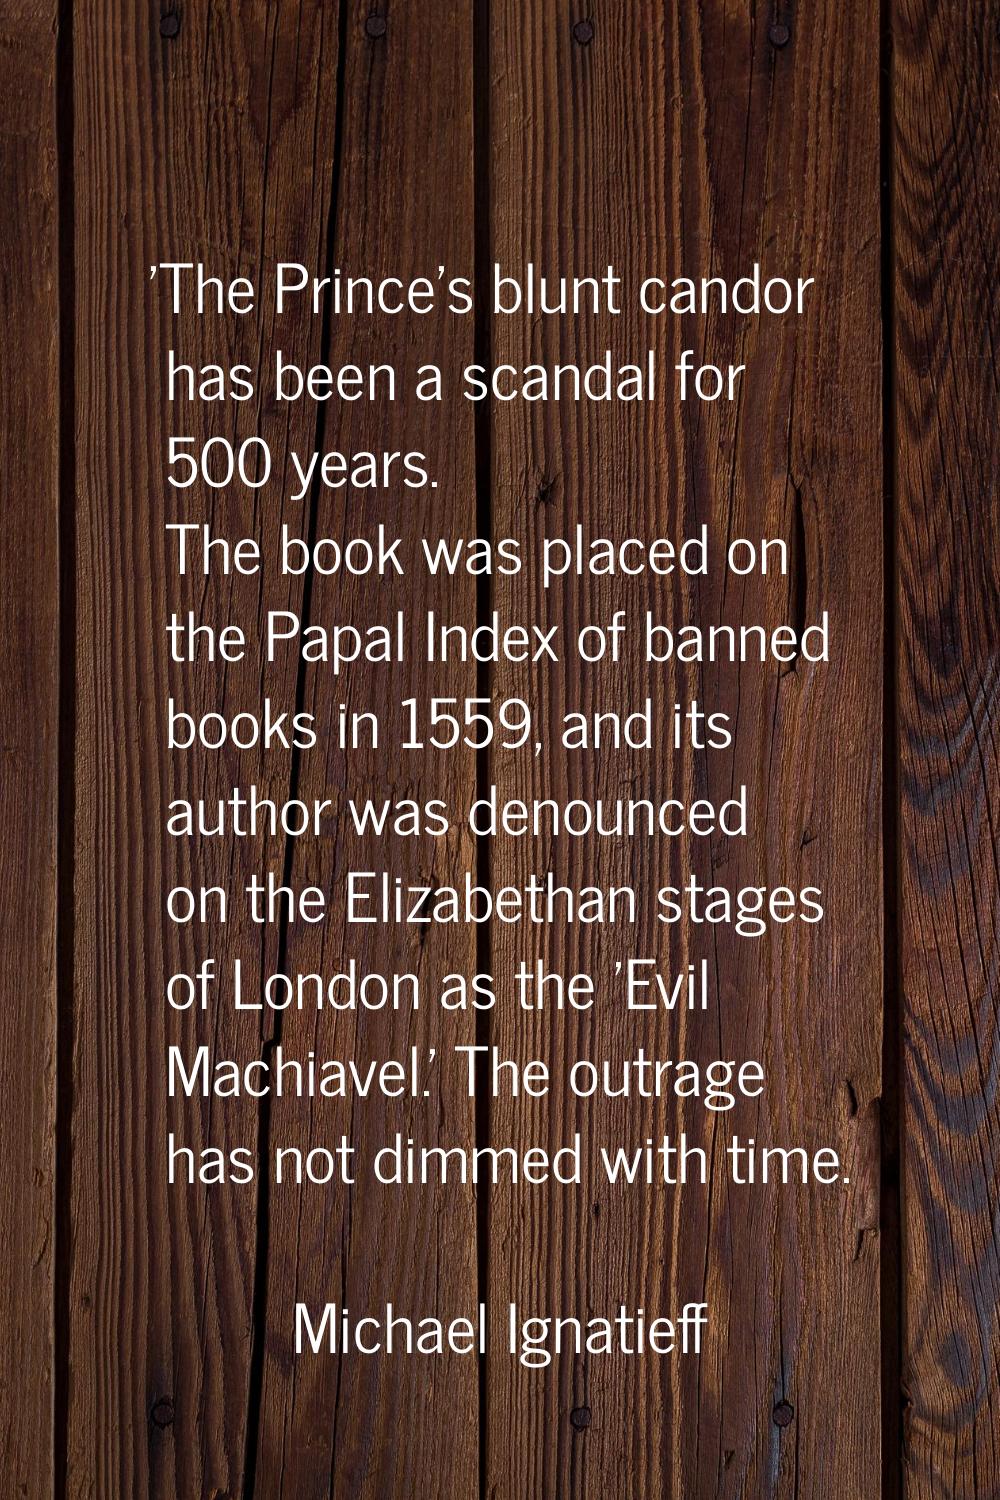 'The Prince's blunt candor has been a scandal for 500 years. The book was placed on the Papal Index